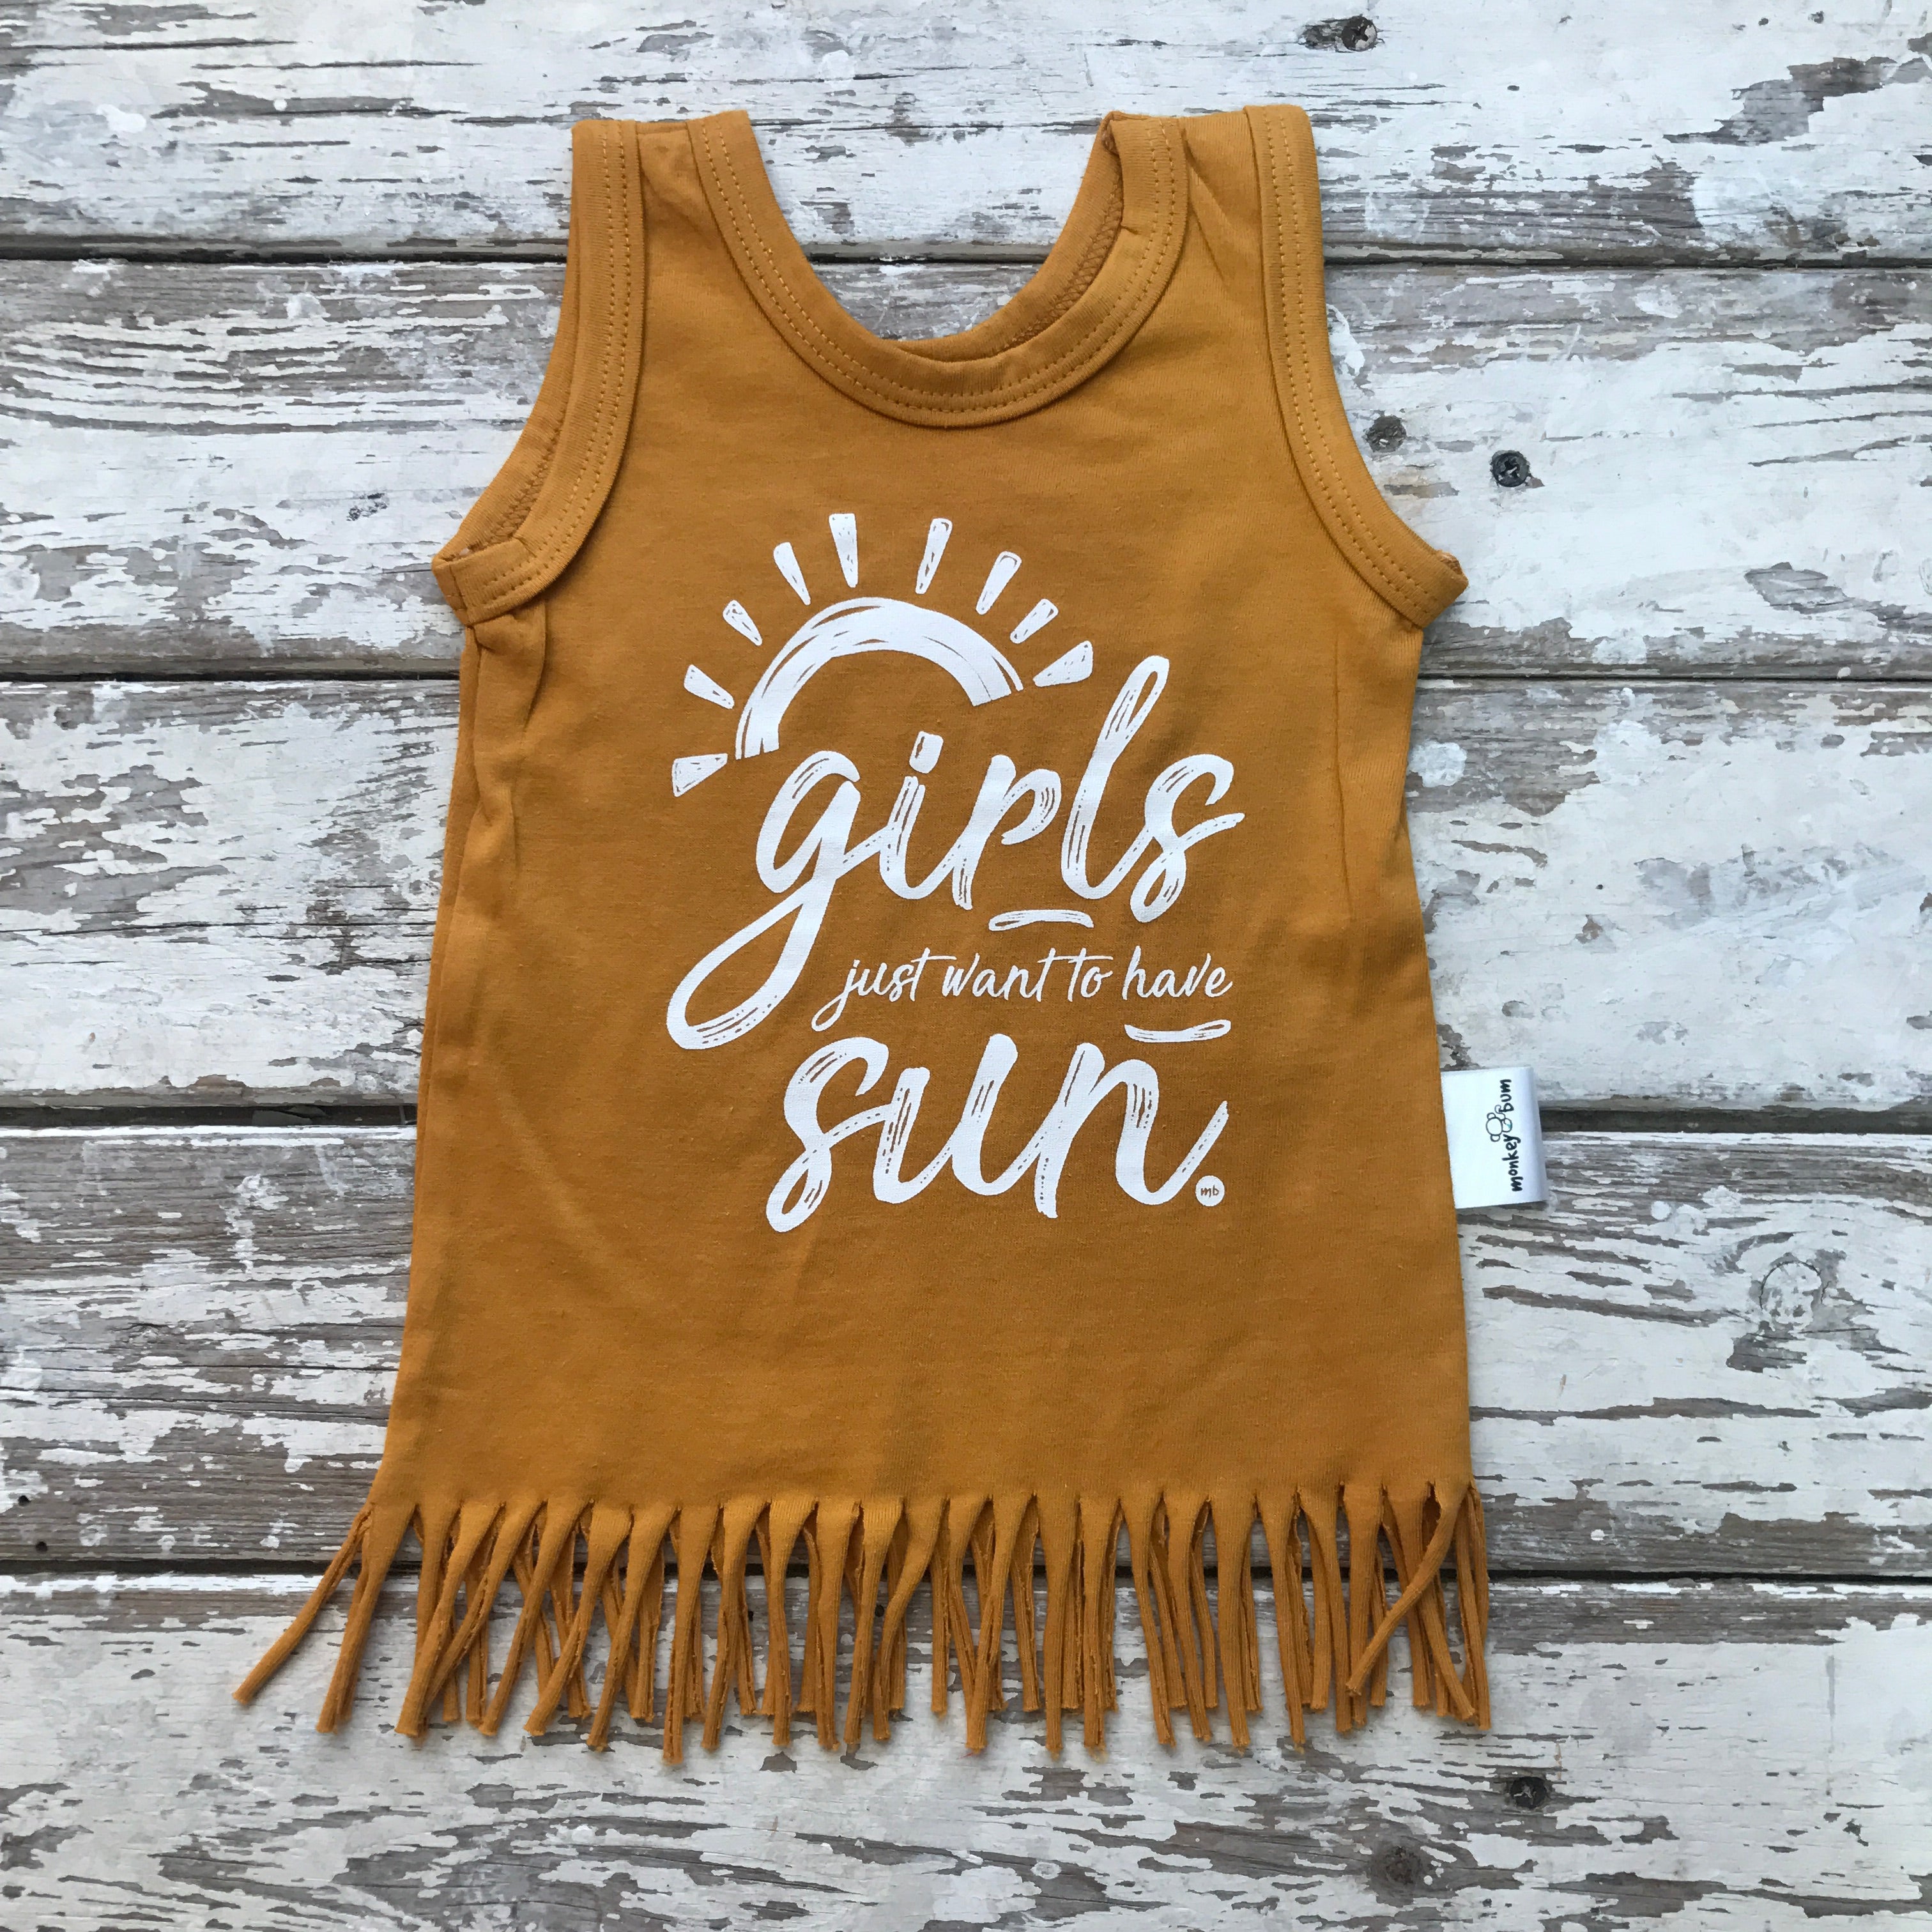 Fringe Dress: Girls Just Want to Have Sun